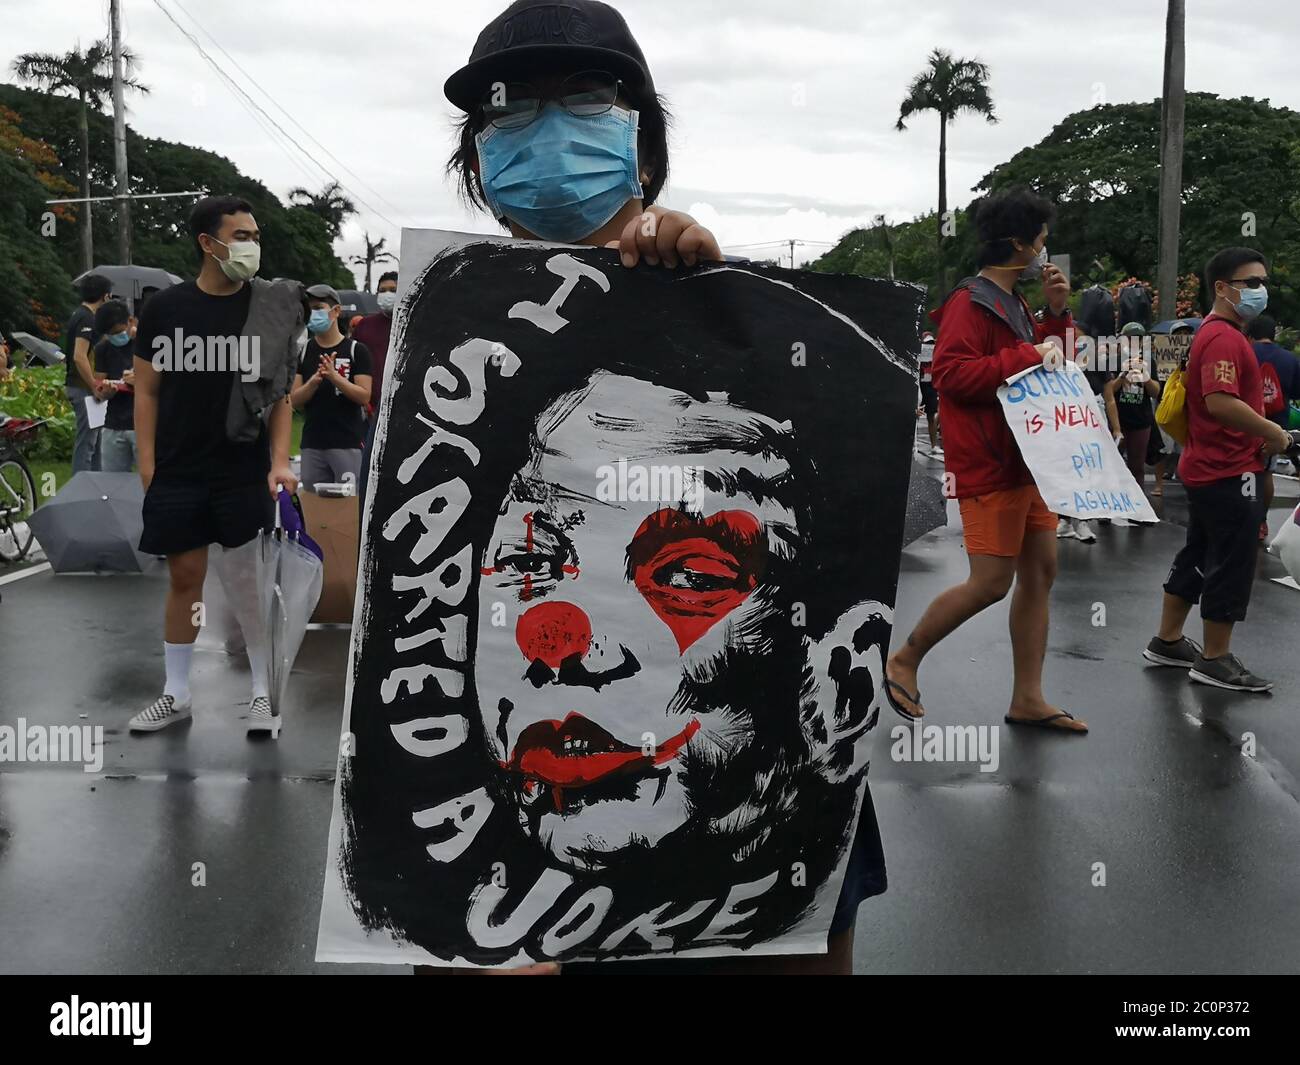 Quezon City Philippines 12th June An Independence Day Protest Dubbed As Grand Mananita Was Held In Up Diliman Quezon City Philippines On June 12 Attended By Thousand Of Militant Groups